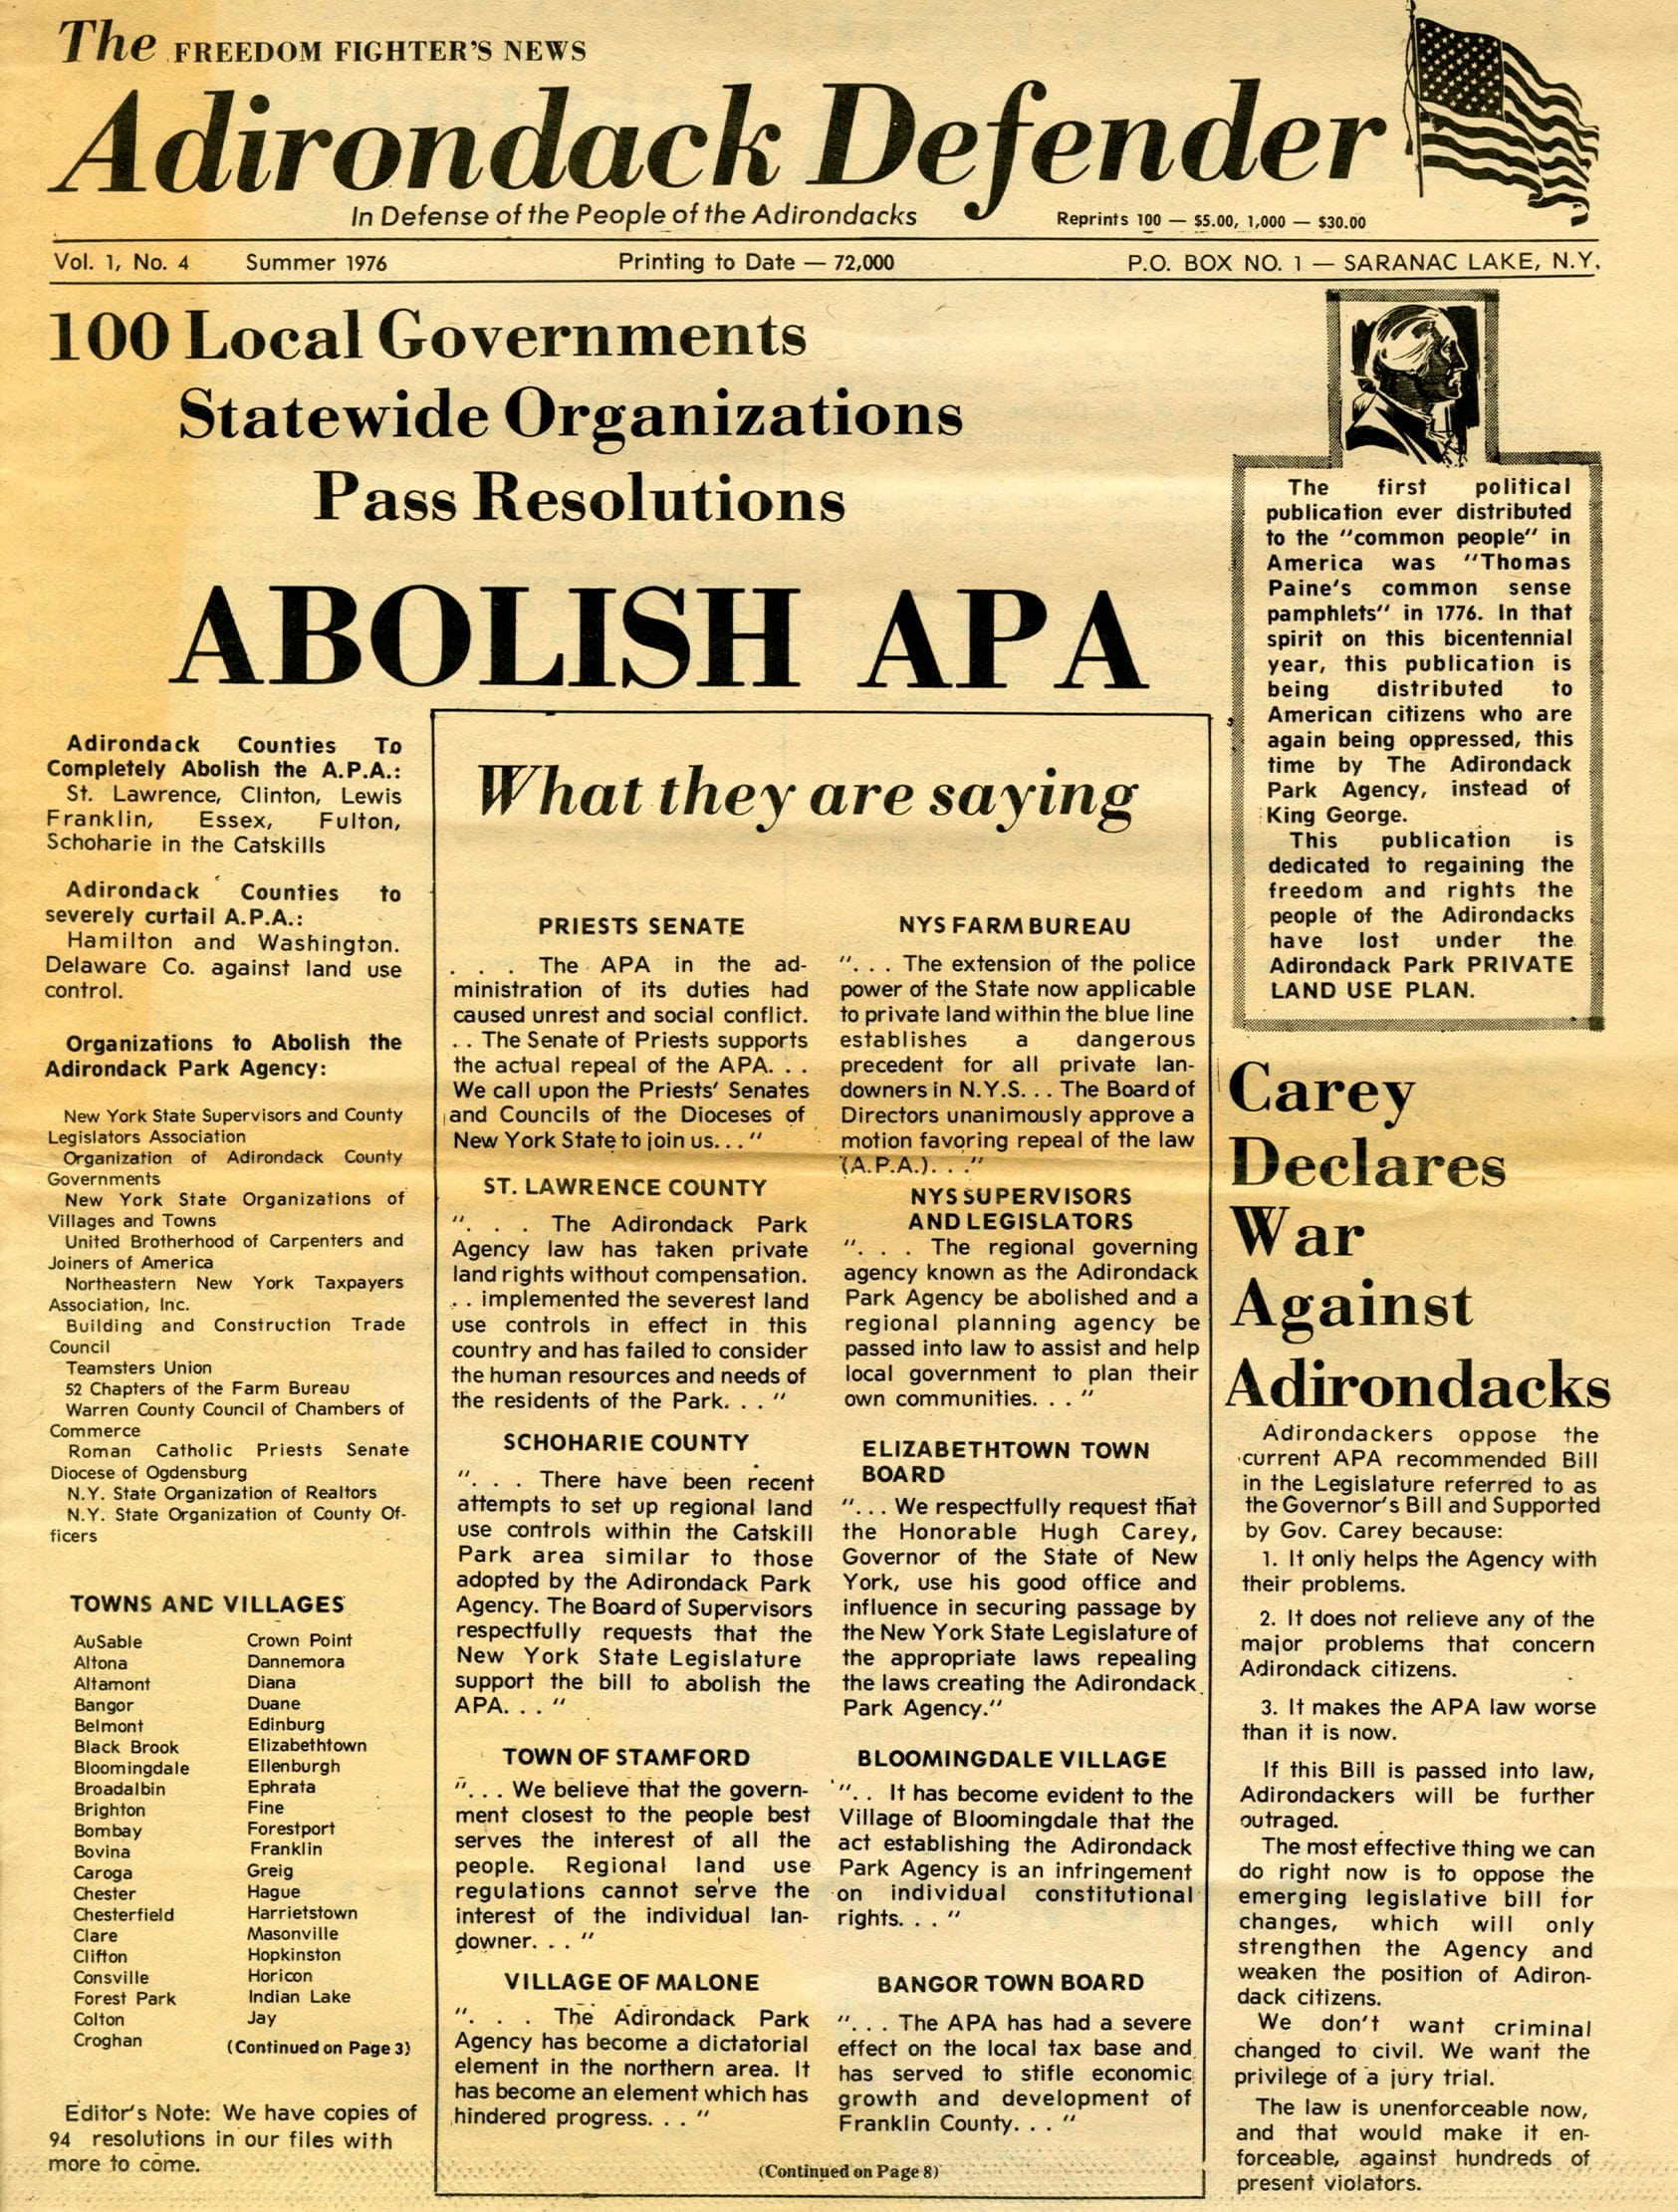 Front page of the Adirondack Defender Newspaper from the Summer 1976.